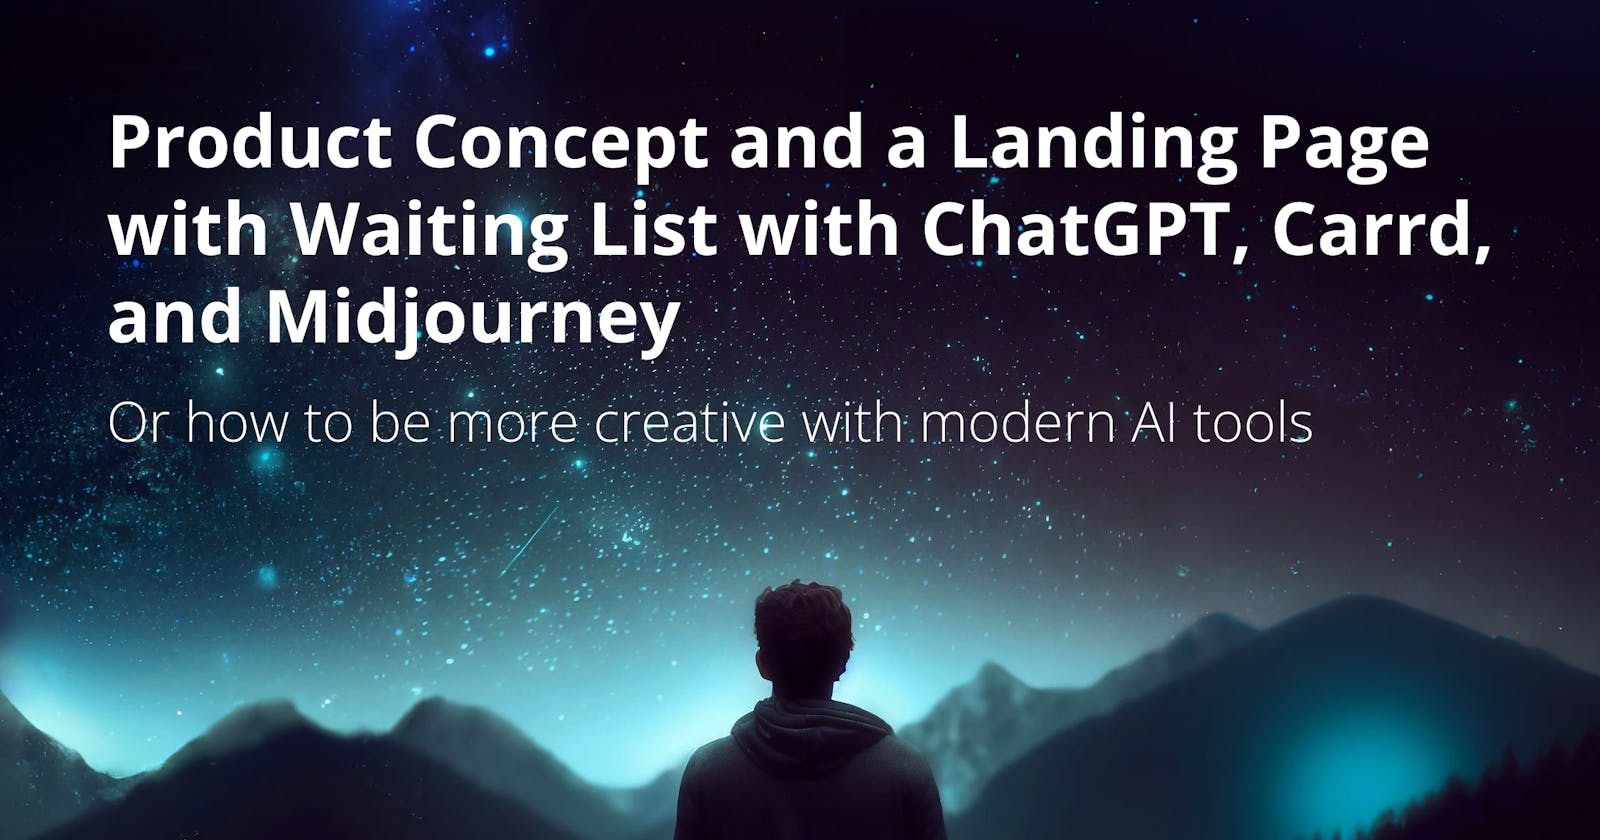 From Ideas to Action: Creating a Product Concept and a Landing Page with Waiting List with ChatGPT, Carrd, and Midjourney